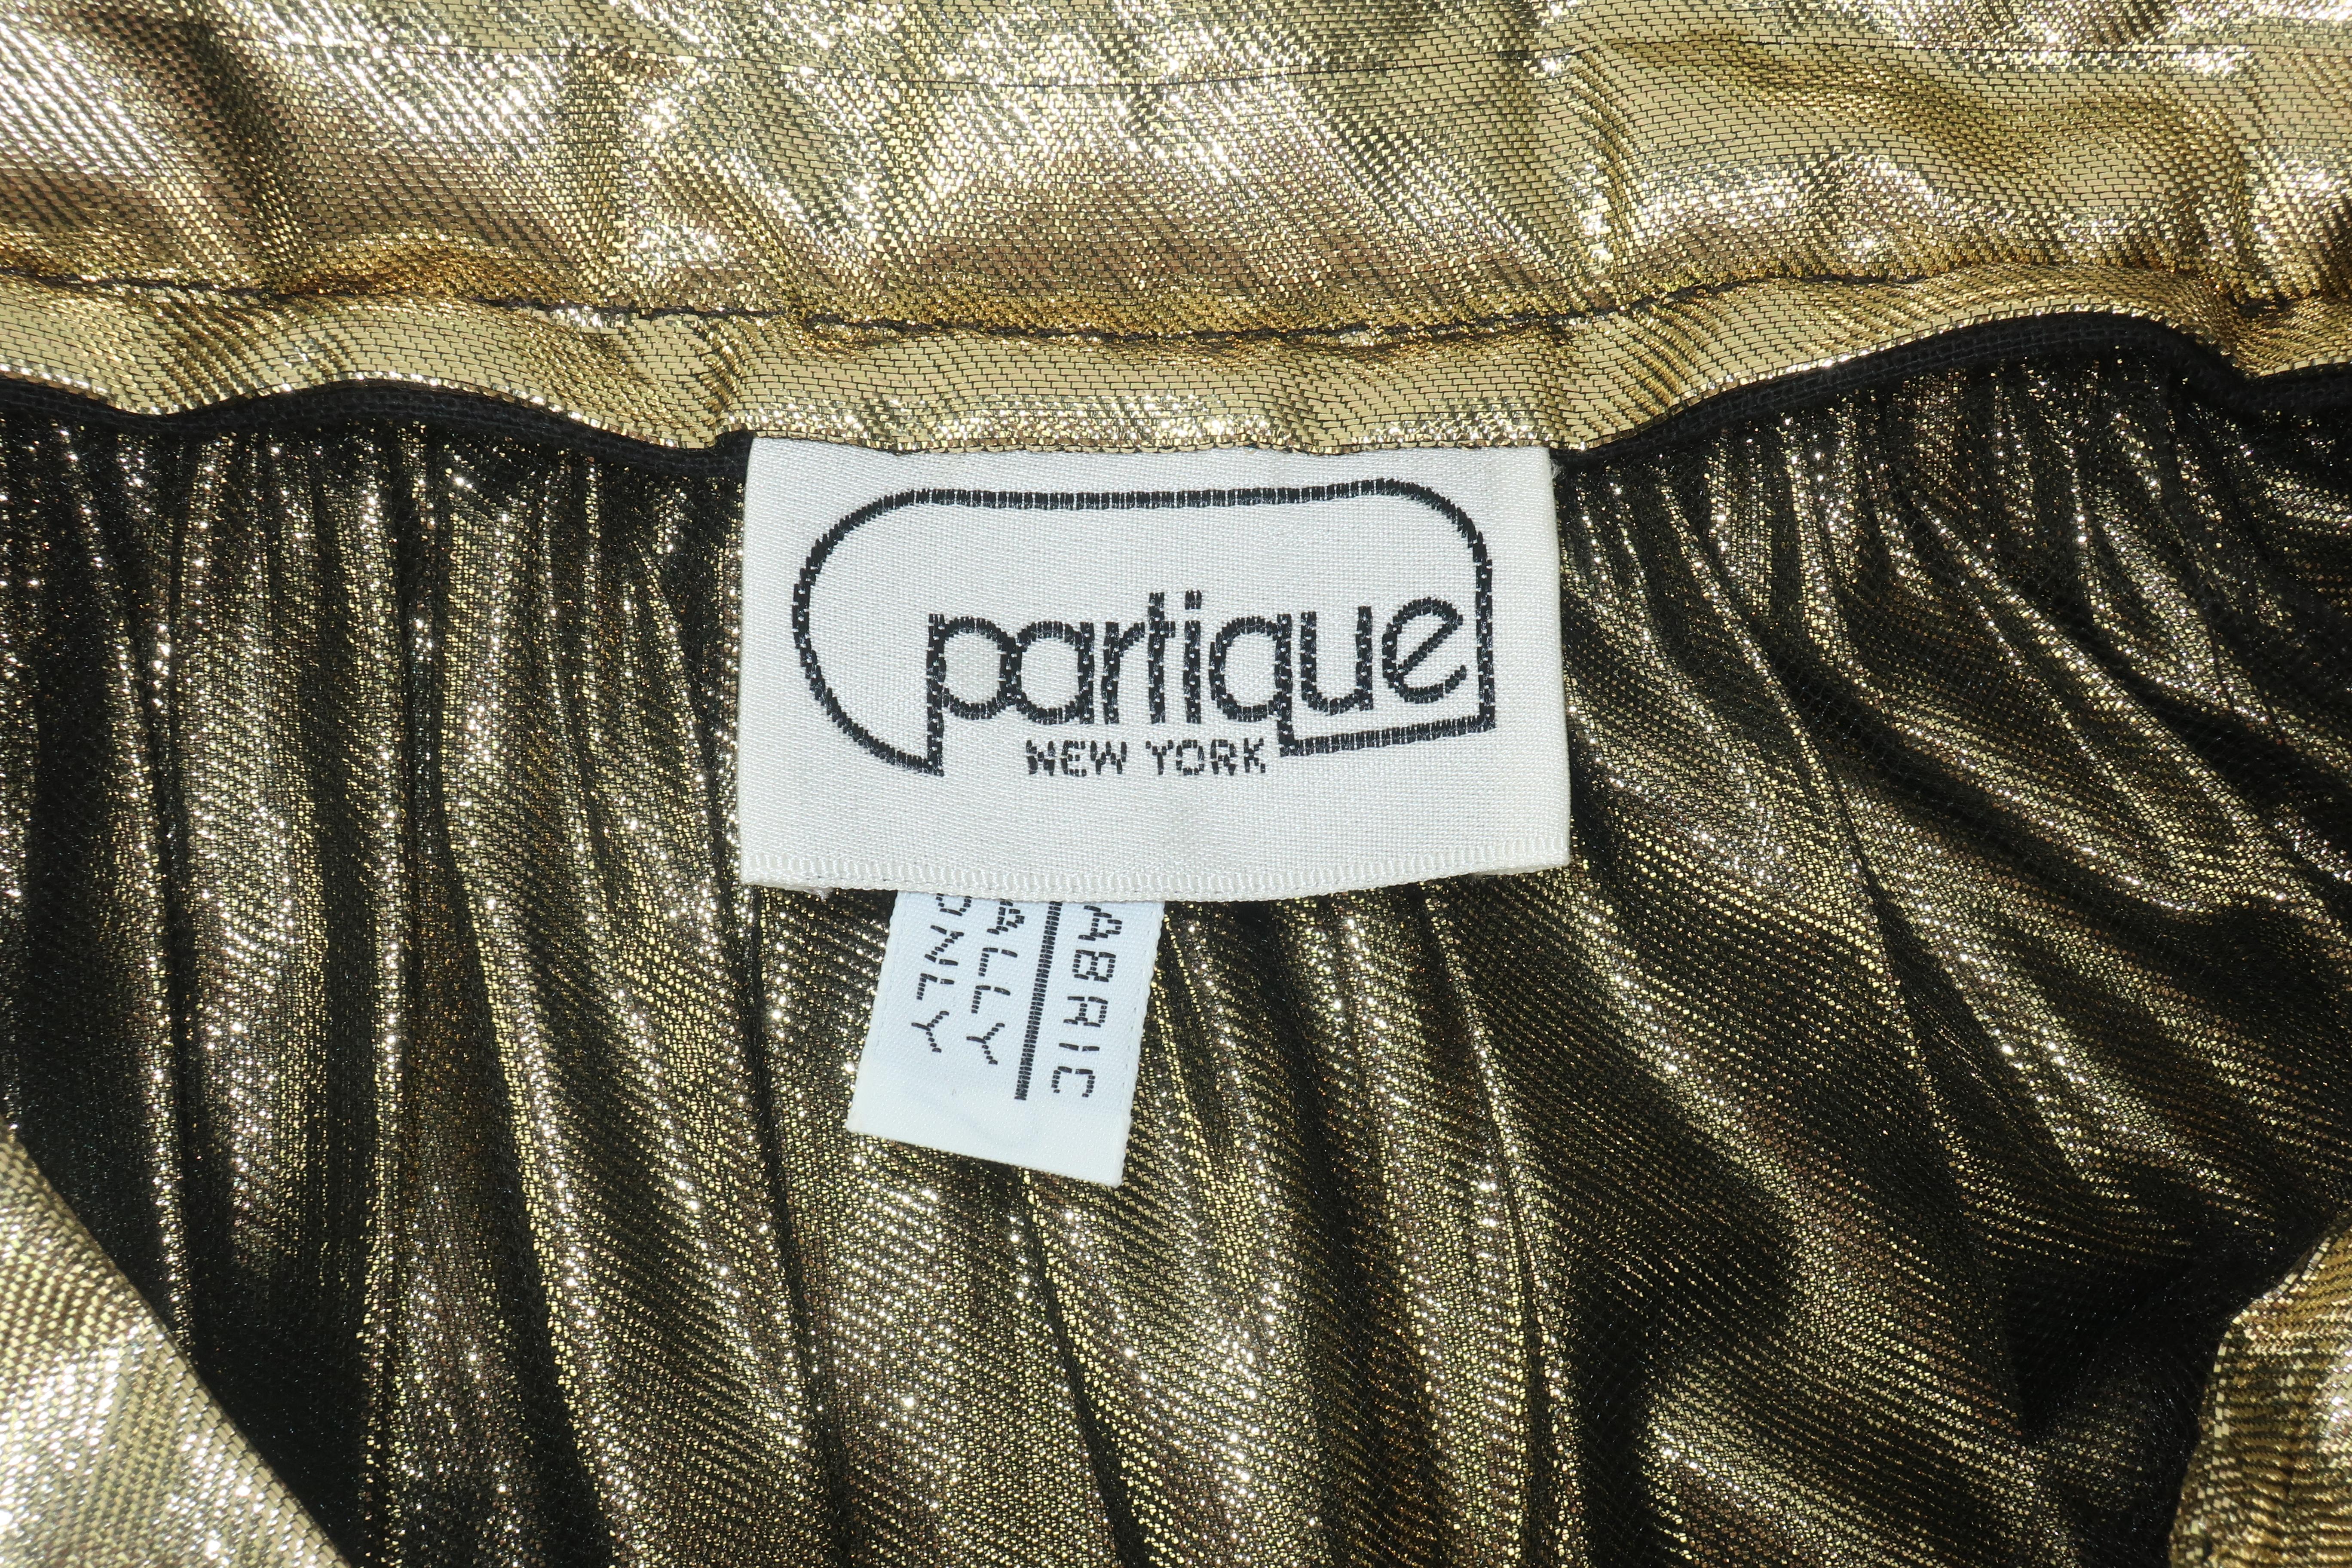 Women's Gold Lamé Partique NY Disco Skirt With Netting, 1970’s